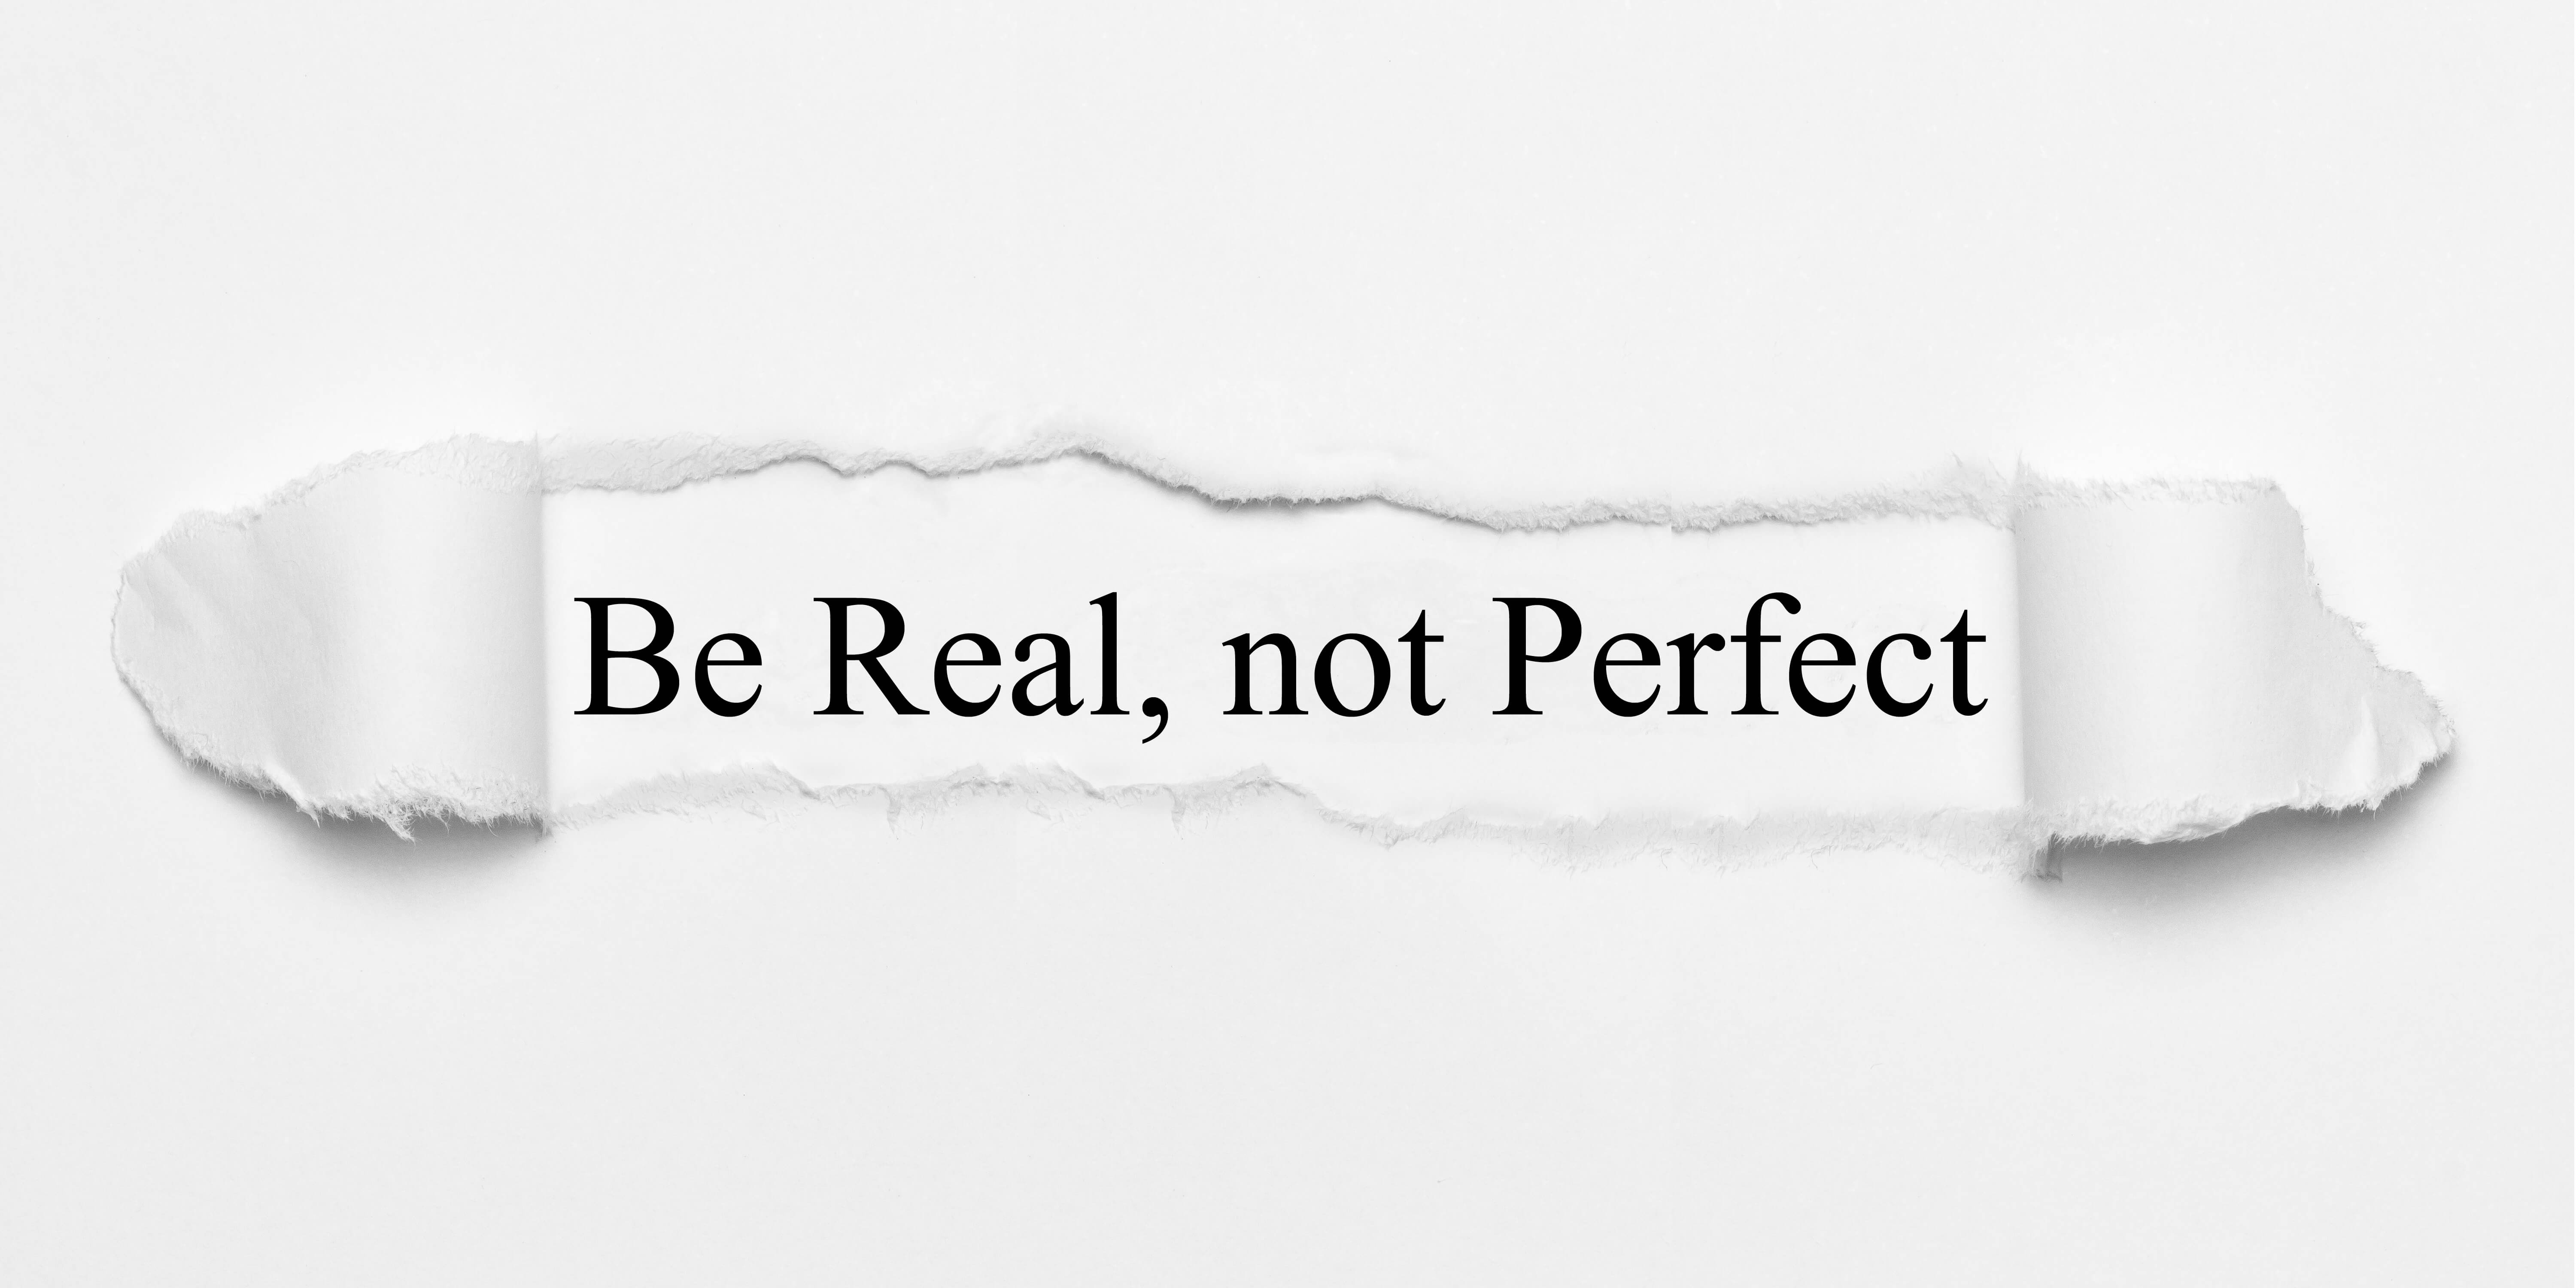 6 Steps for Overcoming Perfectionism and Embracing Who You Are